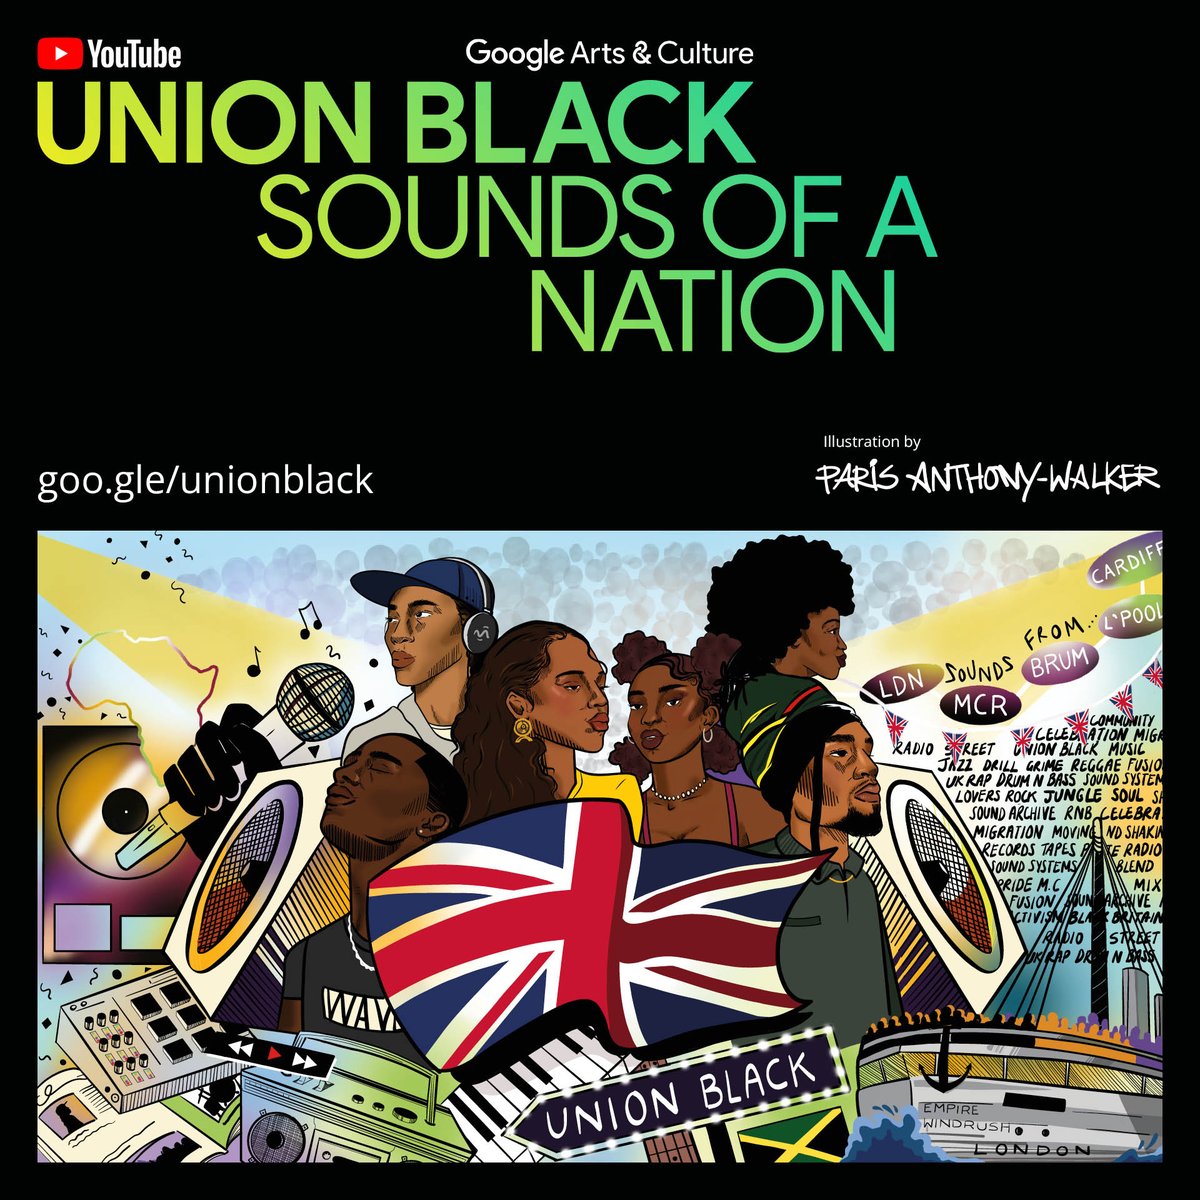 Today is the launch of #UnionBlack, a project by @YouTube @GoogleArts and 25 cultural partners and collaborators. Union Black celebrates the impact of Black British music and culture and we're so proud to be a part of it Head to goo.gle/unionblack to learn more!